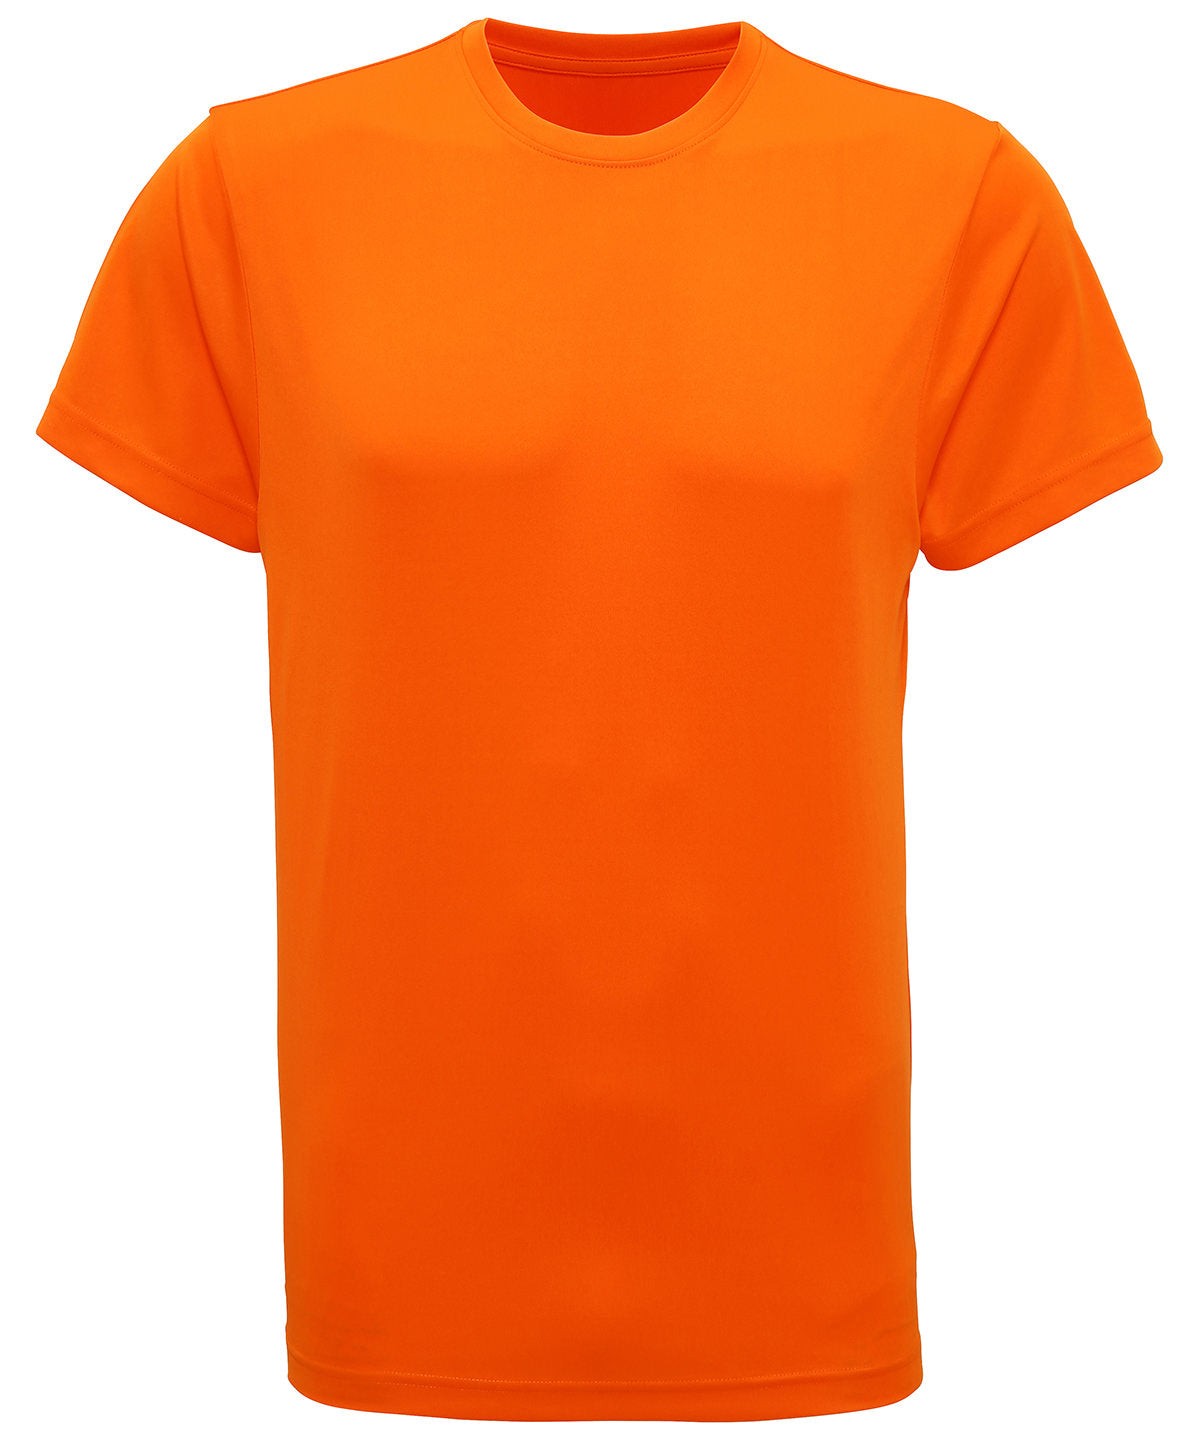 Orange - TriDri® performance t-shirt T-Shirts TriDri® Activewear & Performance, Athleisurewear, Back to the Gym, Exclusives, Gymwear, Must Haves, New Colours For 2022, Outdoor Sports, Plus Sizes, Rebrandable, Sports & Leisure, T-Shirts & Vests, Team Sportswear, UPF Protection Schoolwear Centres